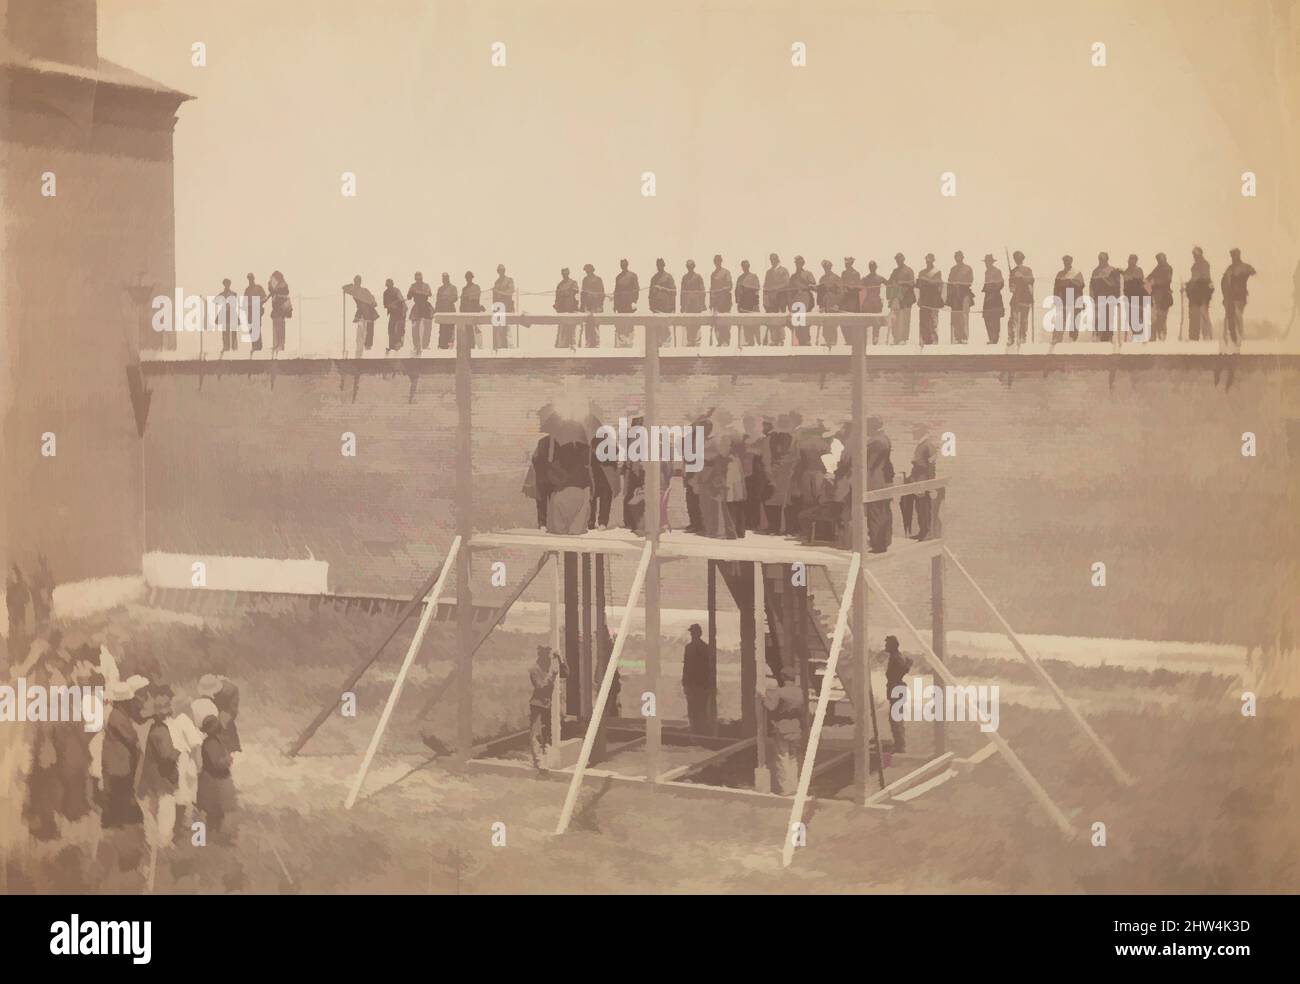 Art inspired by Execution of the Conspirators, July 7, 1865, Albumen silver print from glass negative, Image: 16.8 x 24.2 cm (6 5/8 x 9 1/2 in.), Photographs, Alexander Gardner (American, Glasgow, Scotland 1821–1882 Washington, D.C.), Alexander Gardner's intimate involvement in the, Classic works modernized by Artotop with a splash of modernity. Shapes, color and value, eye-catching visual impact on art. Emotions through freedom of artworks in a contemporary way. A timeless message pursuing a wildly creative new direction. Artists turning to the digital medium and creating the Artotop NFT Stock Photo